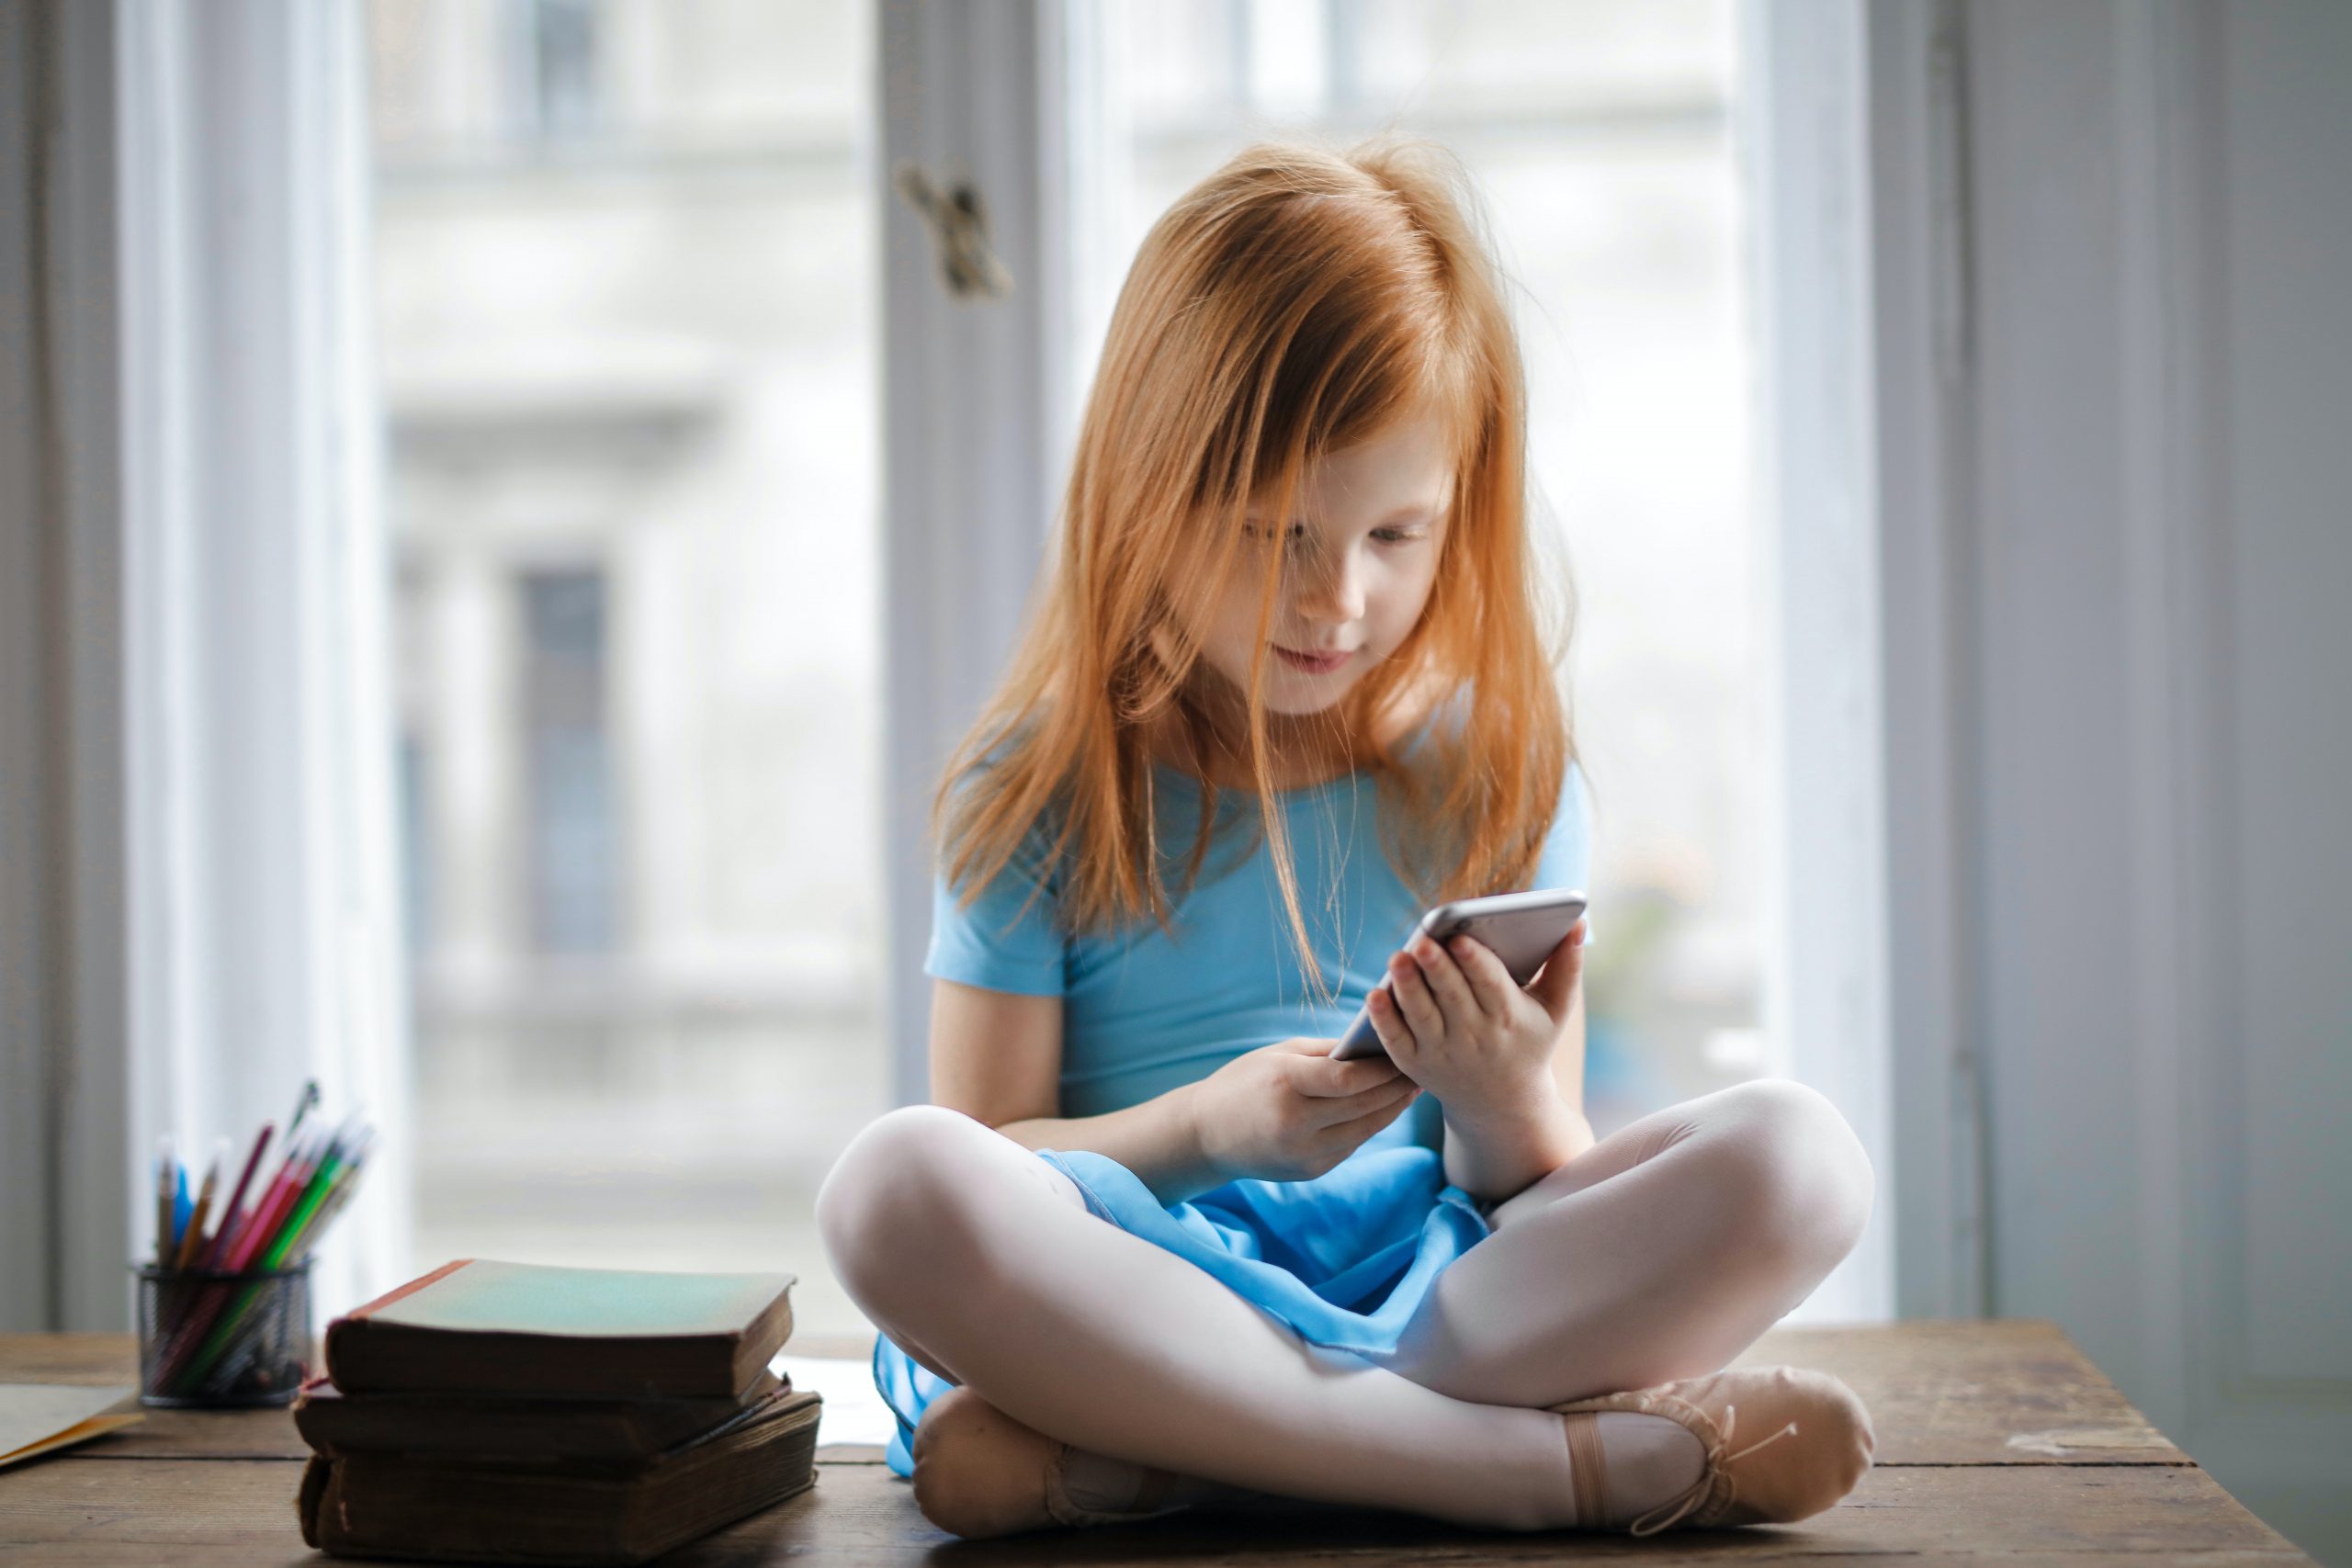 When should you buy a cell phone for the first time for your child and what equipment should you bet on then?